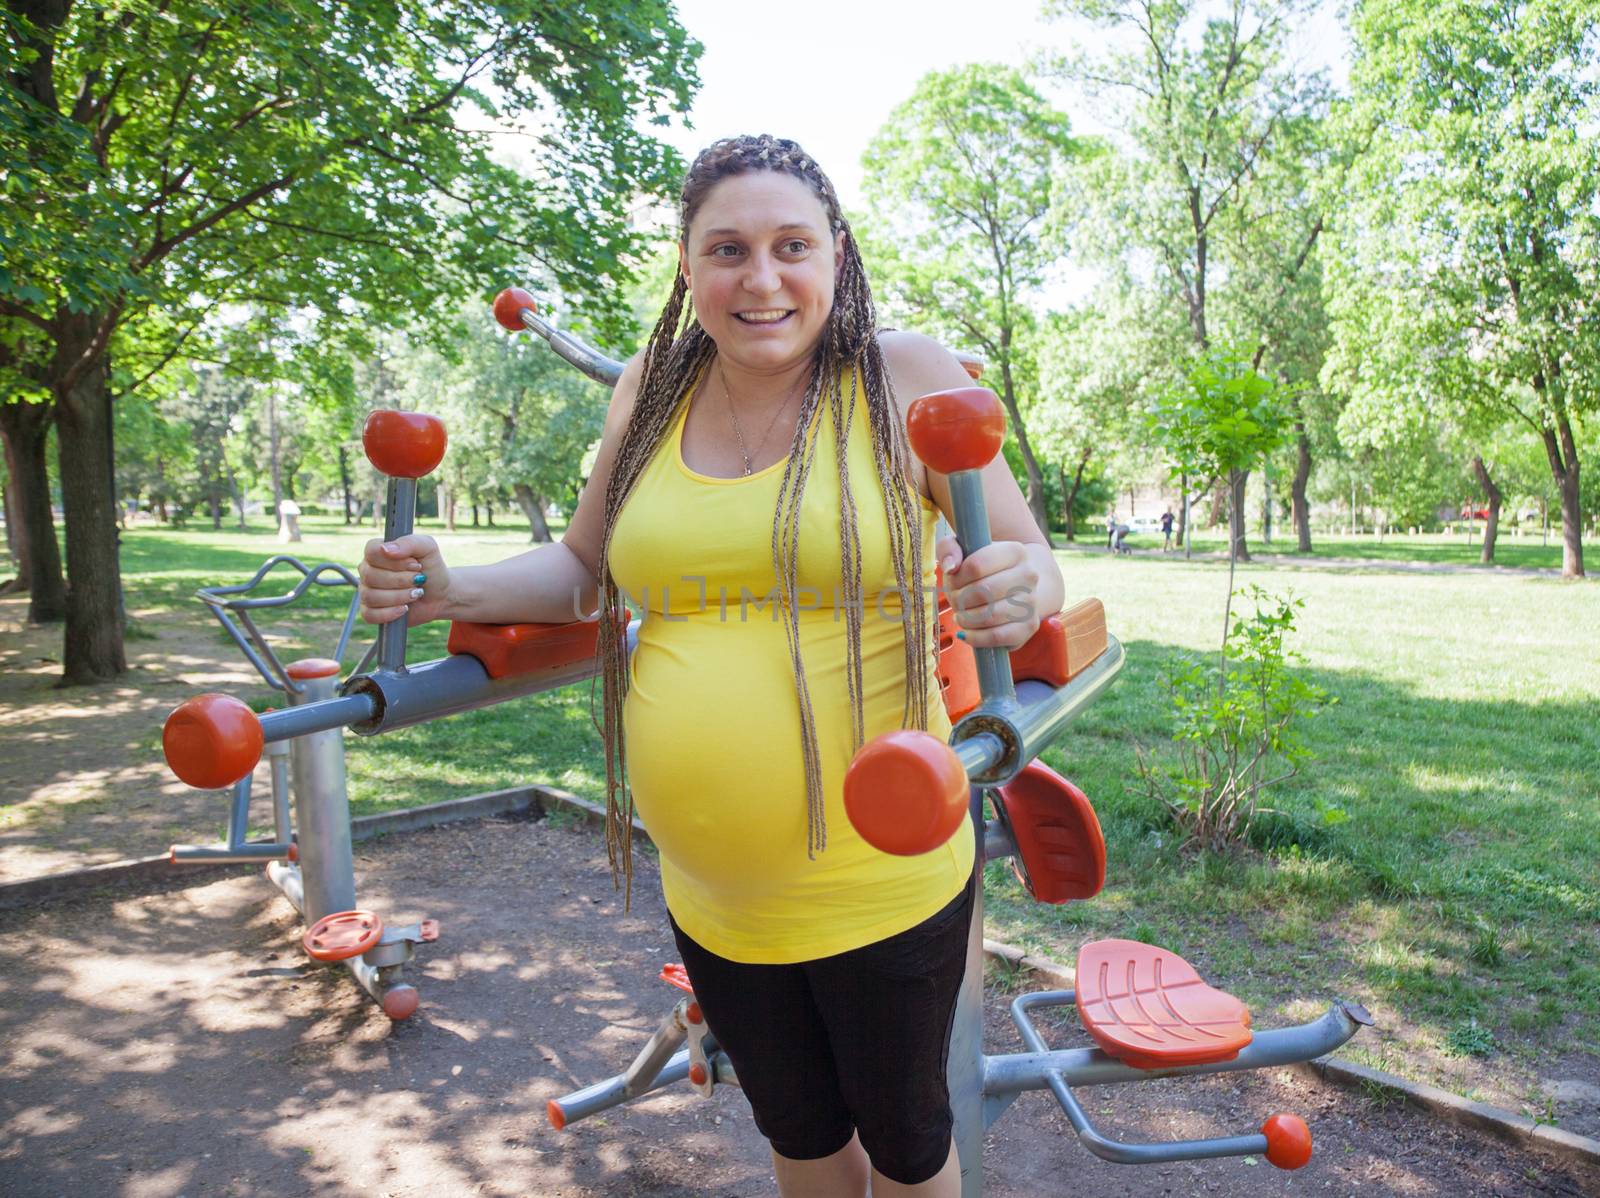 Smiling pregnant woman is doing exercises outdoors on fitness machines in a park.